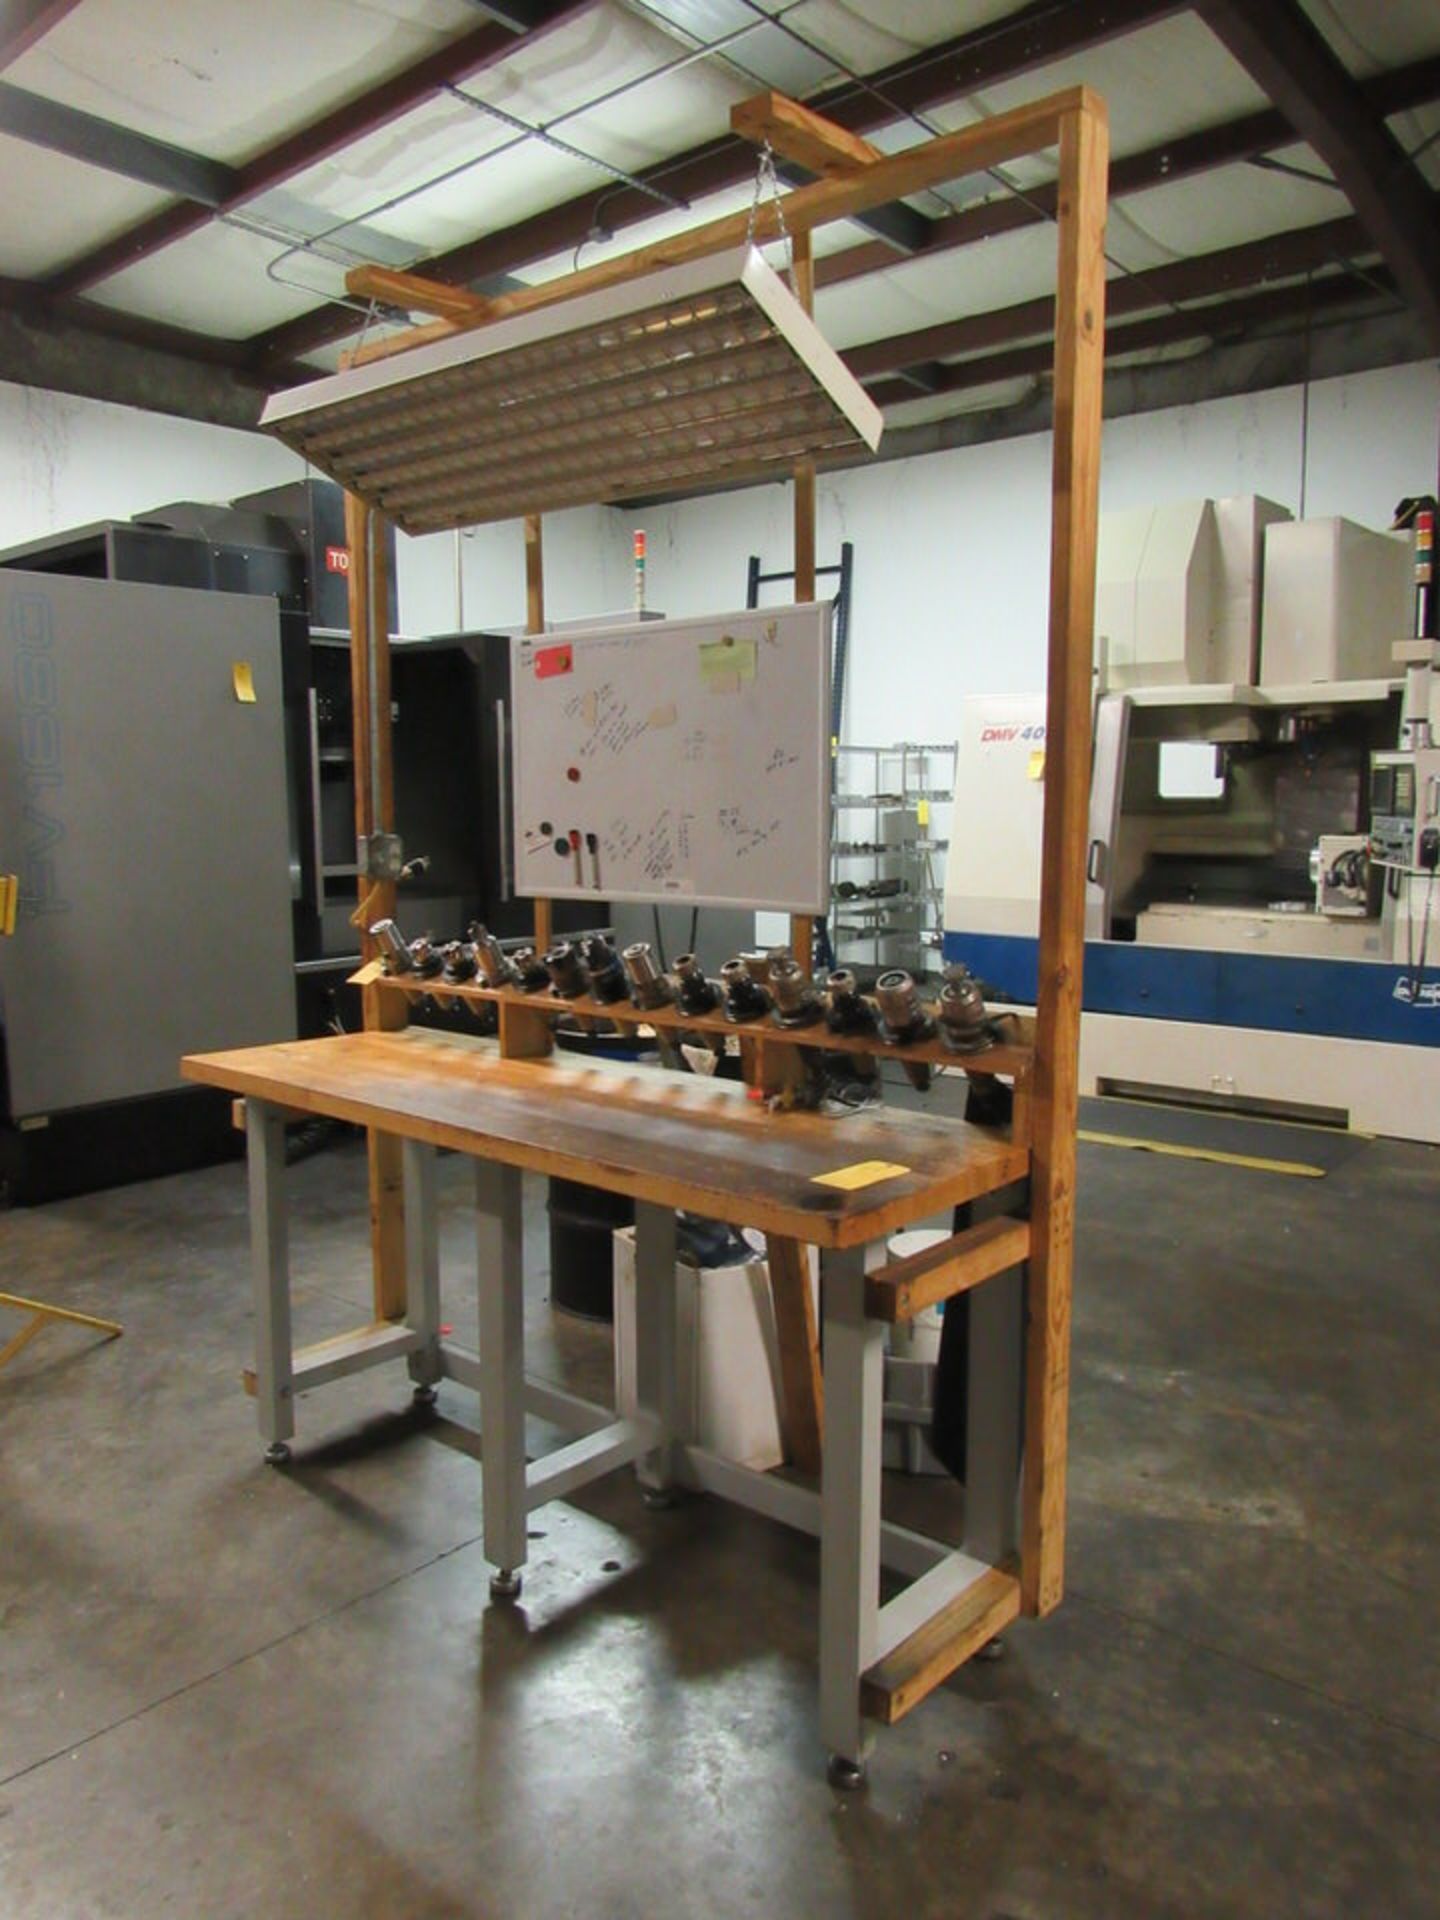 Machinist's Work Station, 25" x 72" x 38-1/2" high wooden table, 14 tool holding stations, white - Image 2 of 3